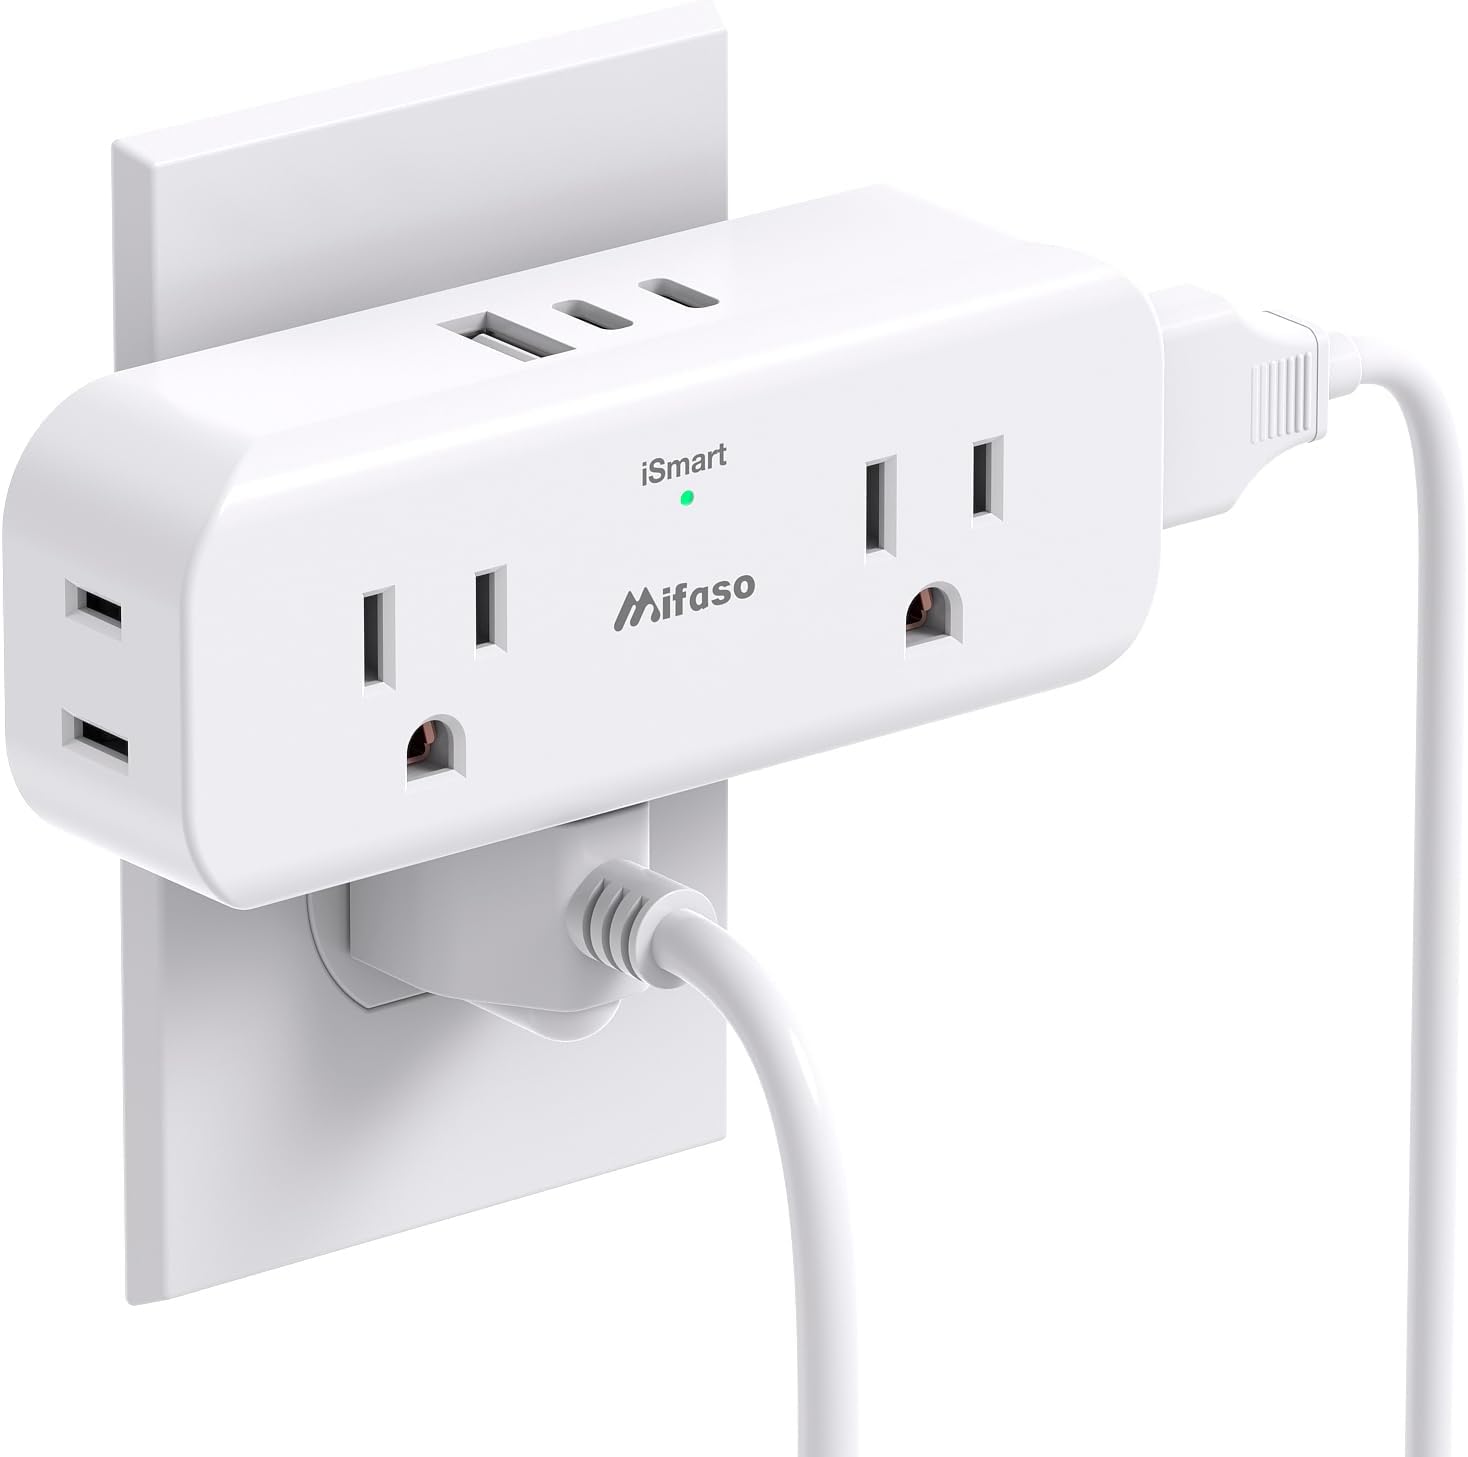 Outlet Extender, 4 Outlet Extension with 1 USB-A 2 USB-C Wall Charger, Multi Plug Outlet Splitter, Electric Wall Outet Expander for Travel, Home, Office, Dorm, Cruise Ship Essentials